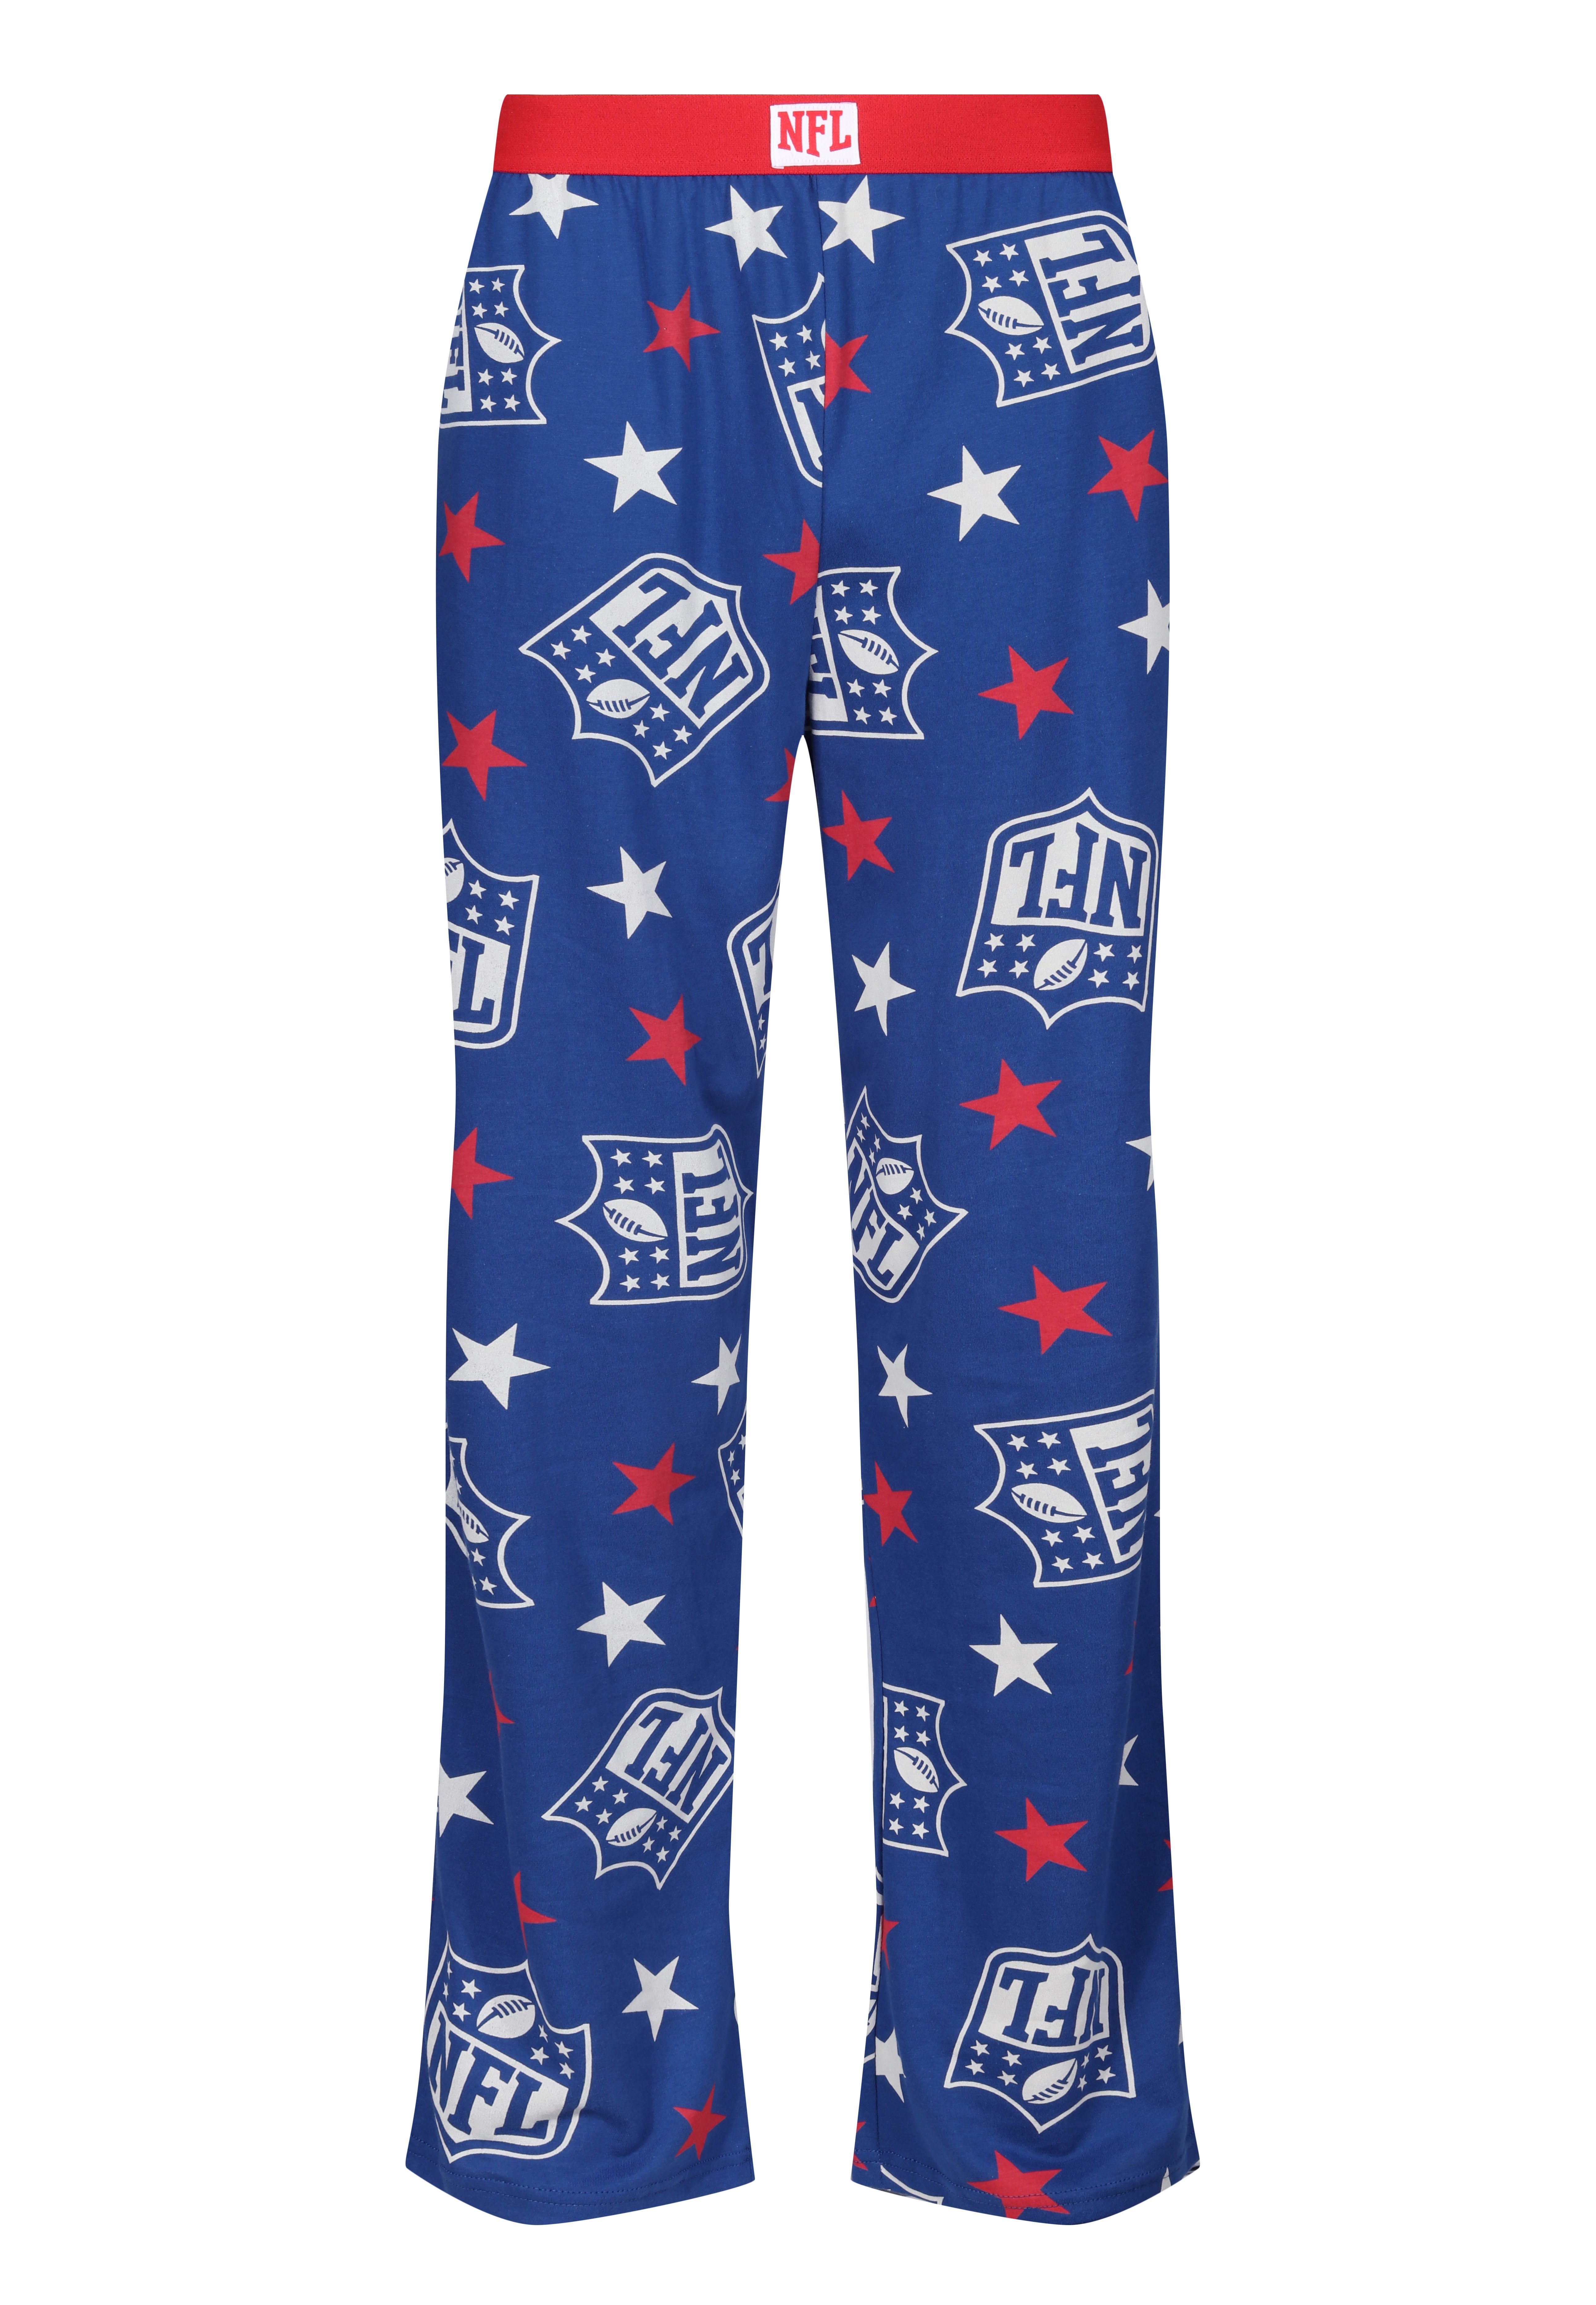 Recovered Loungepants Loungepants NFL Shield and Stars Navy